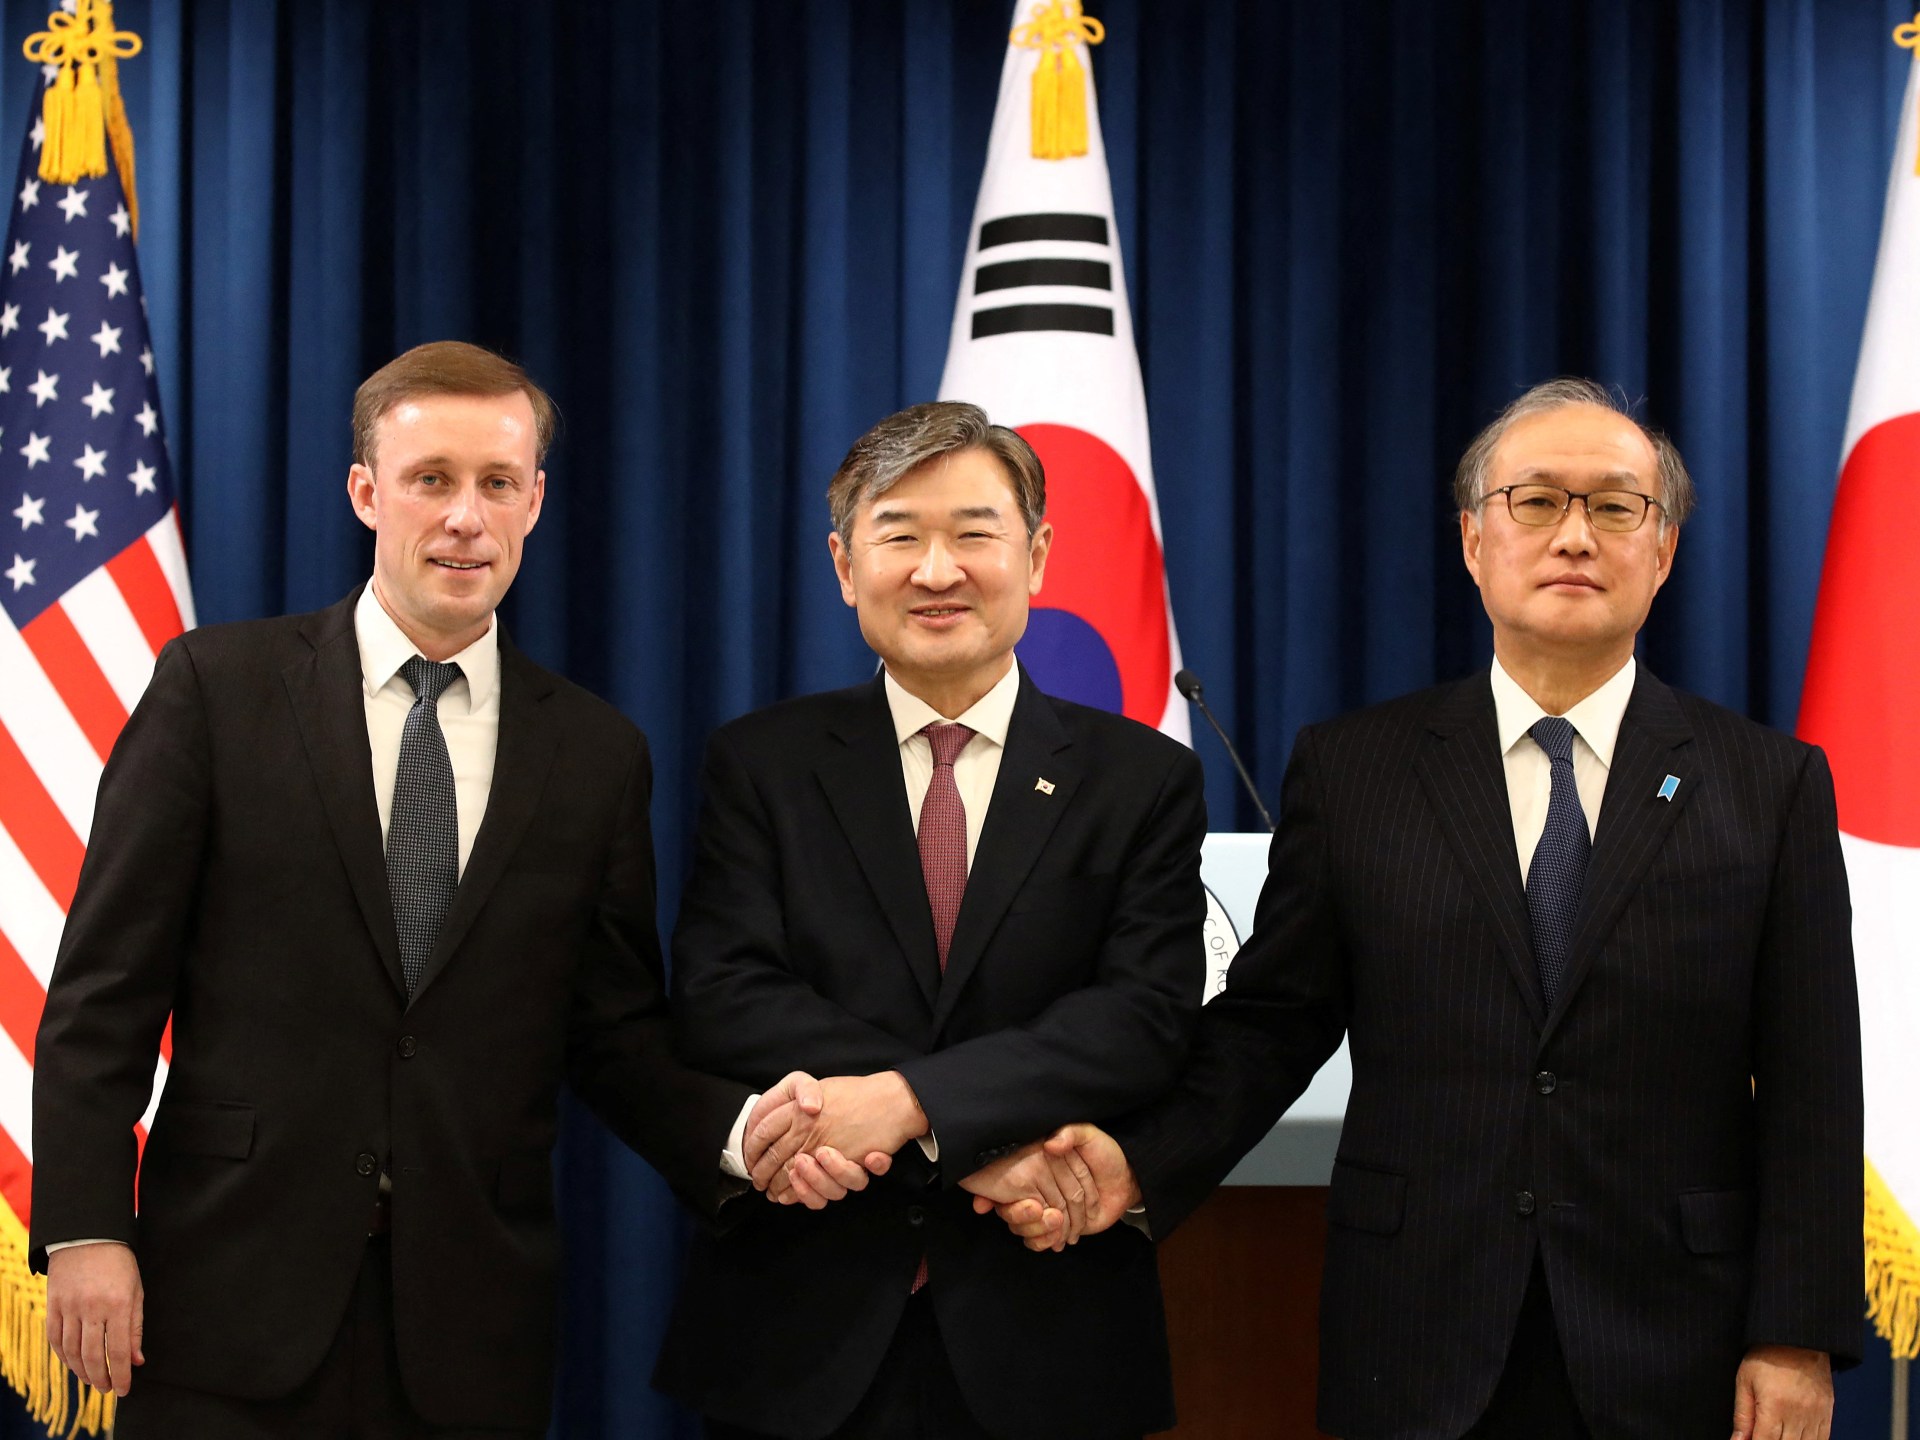 US, Japan, South Korea step up efforts to counter North Korea cyber-threats | Cybersecurity News #Japan #South #Korea #step #efforts #counter #North #Korea #cyberthreats #Cybersecurity #News